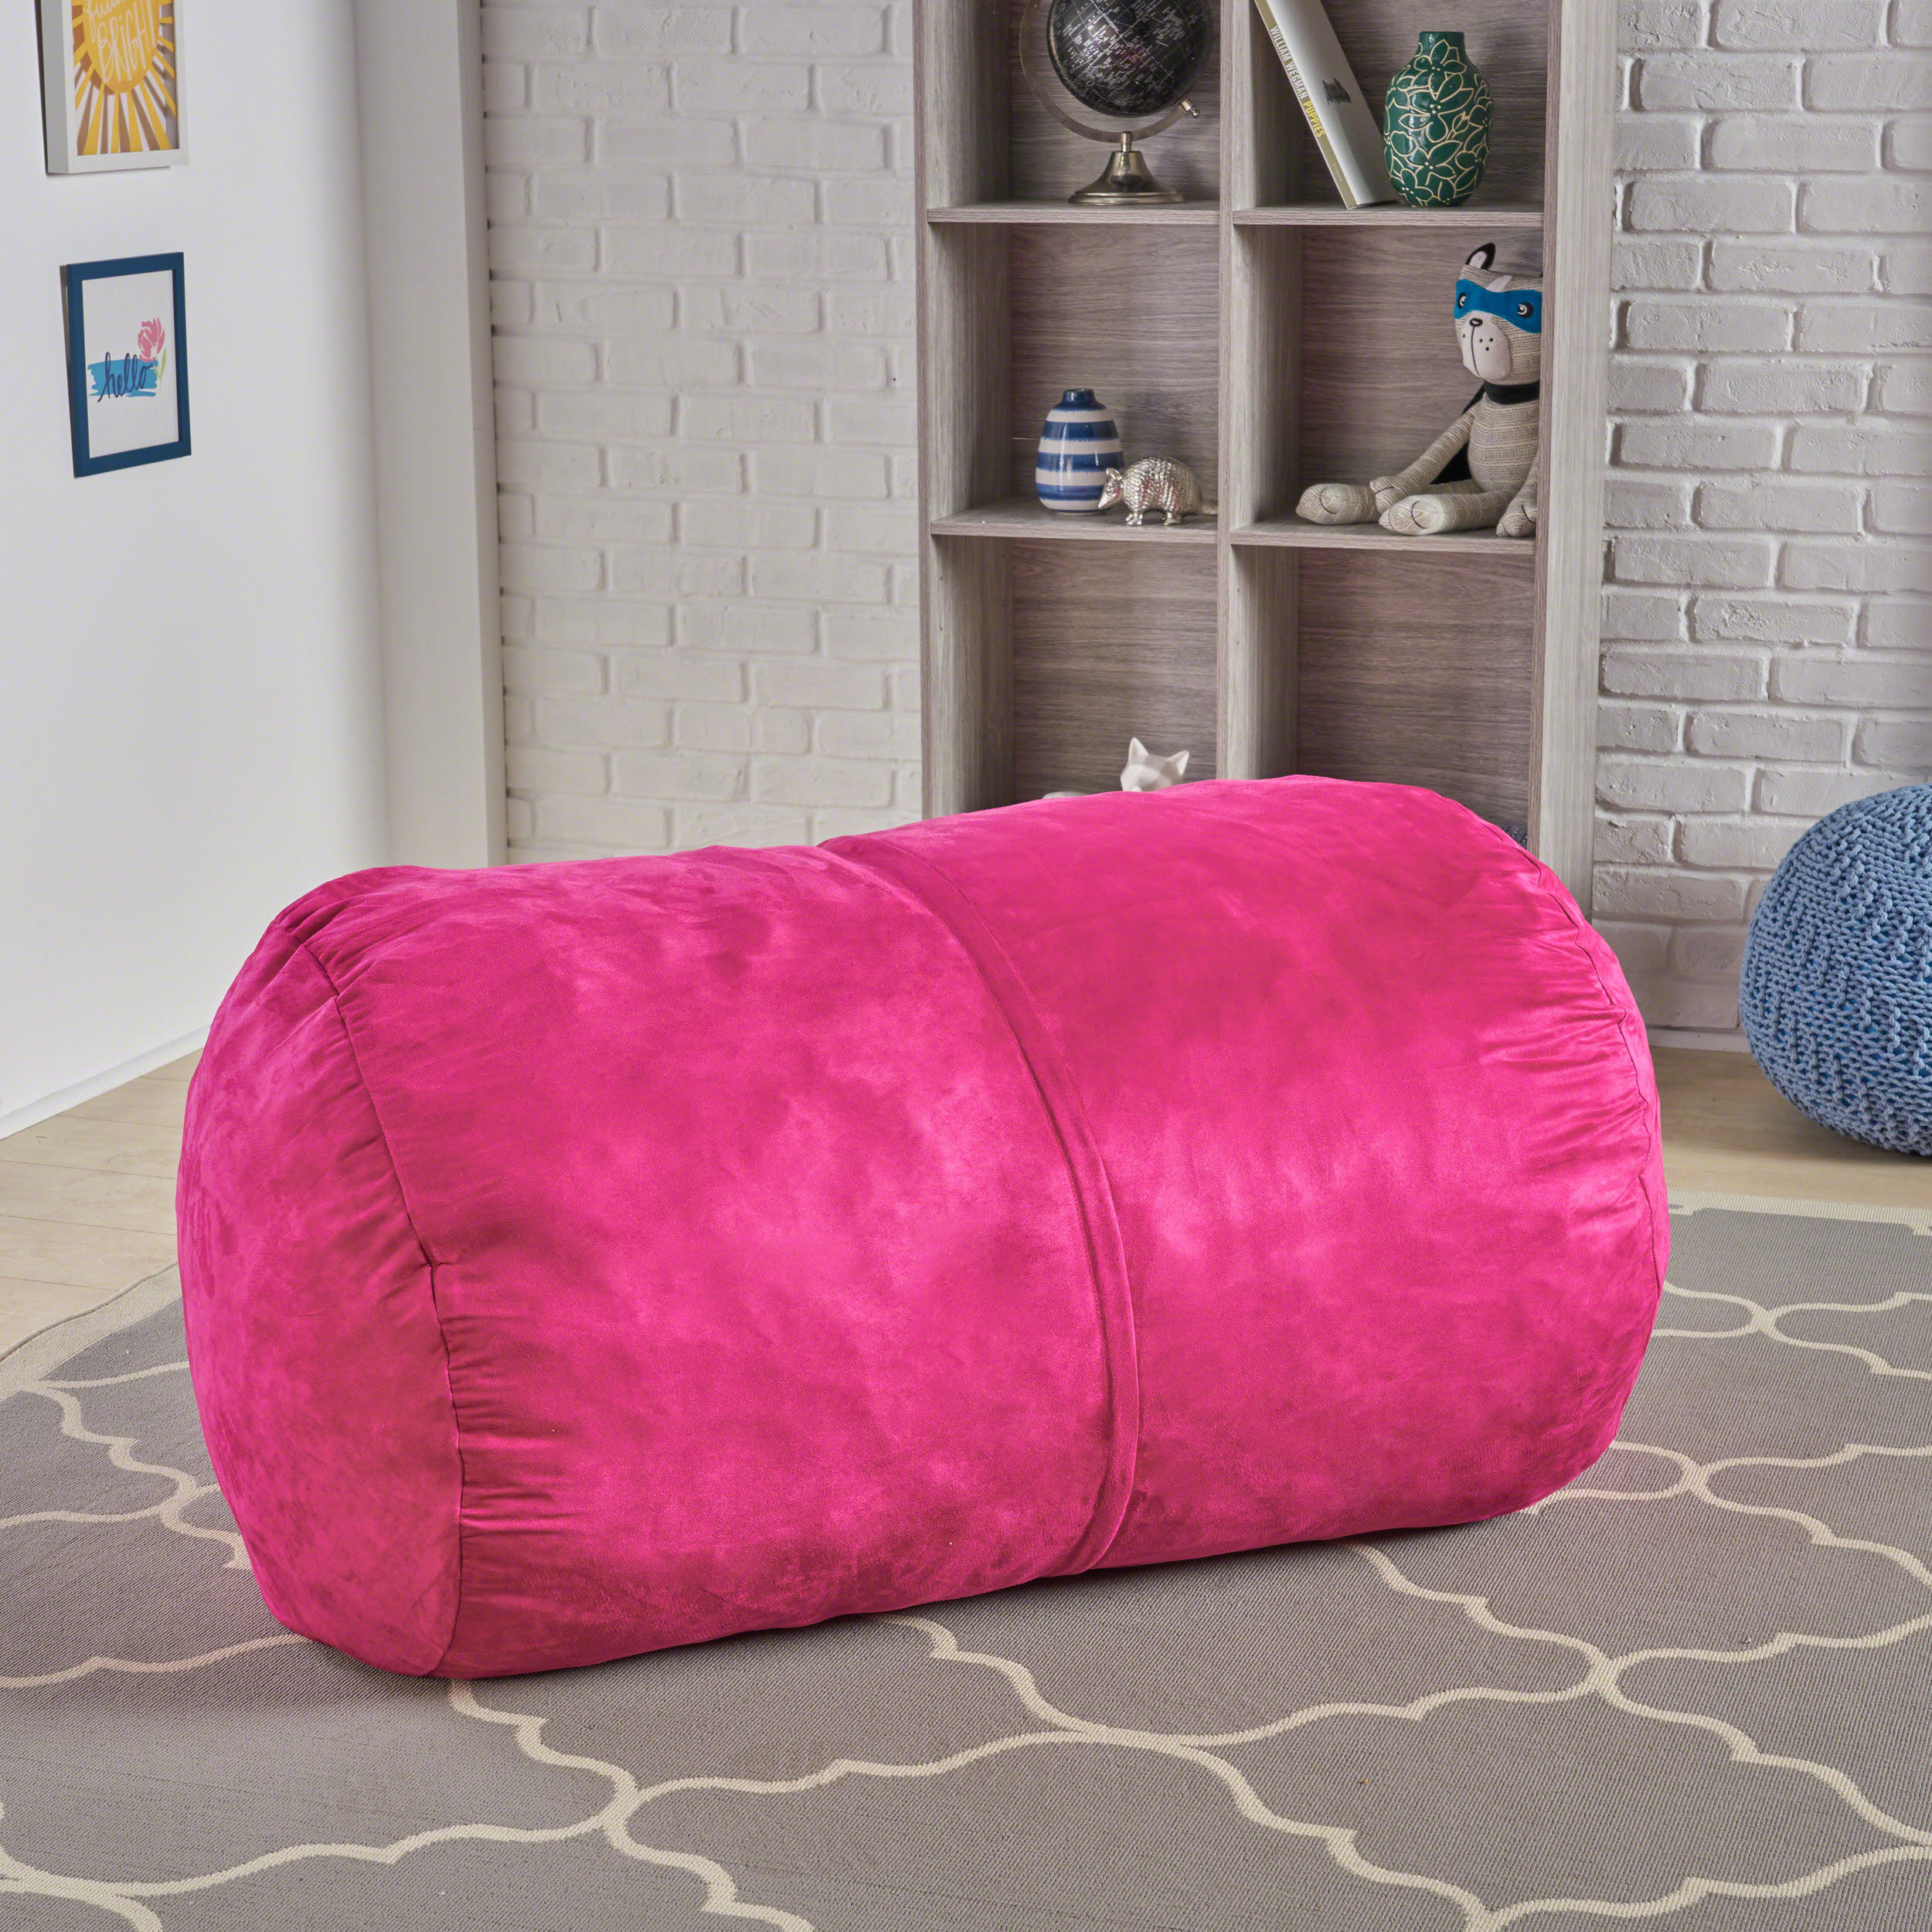 Genevieve Traditional 4 Foot Suede Bean Bag (Cover Only), Fushcia - image 5 of 6